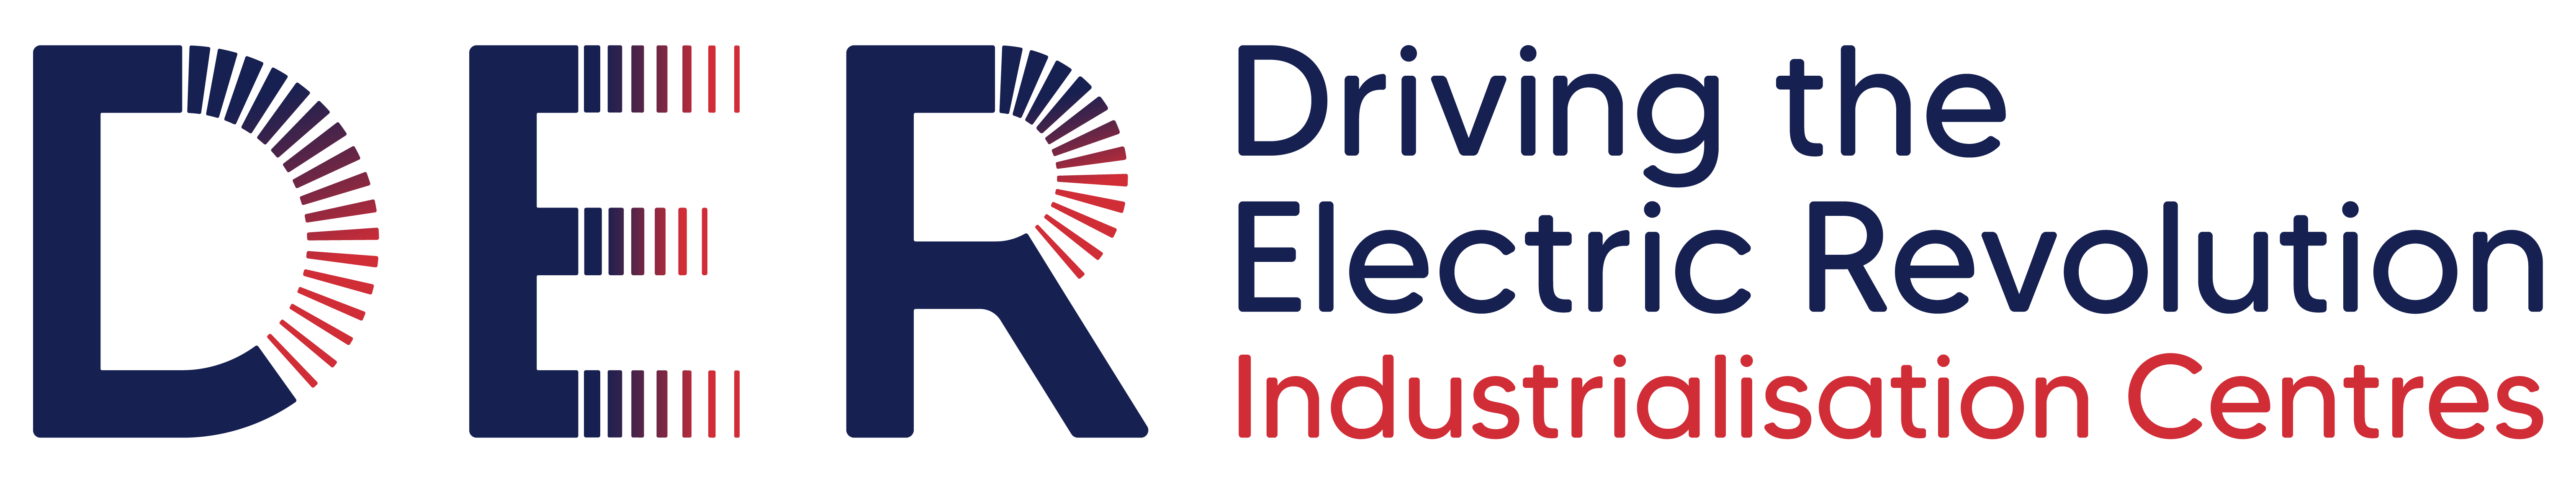 Driving the Electric Revolution Industrialisation Centres